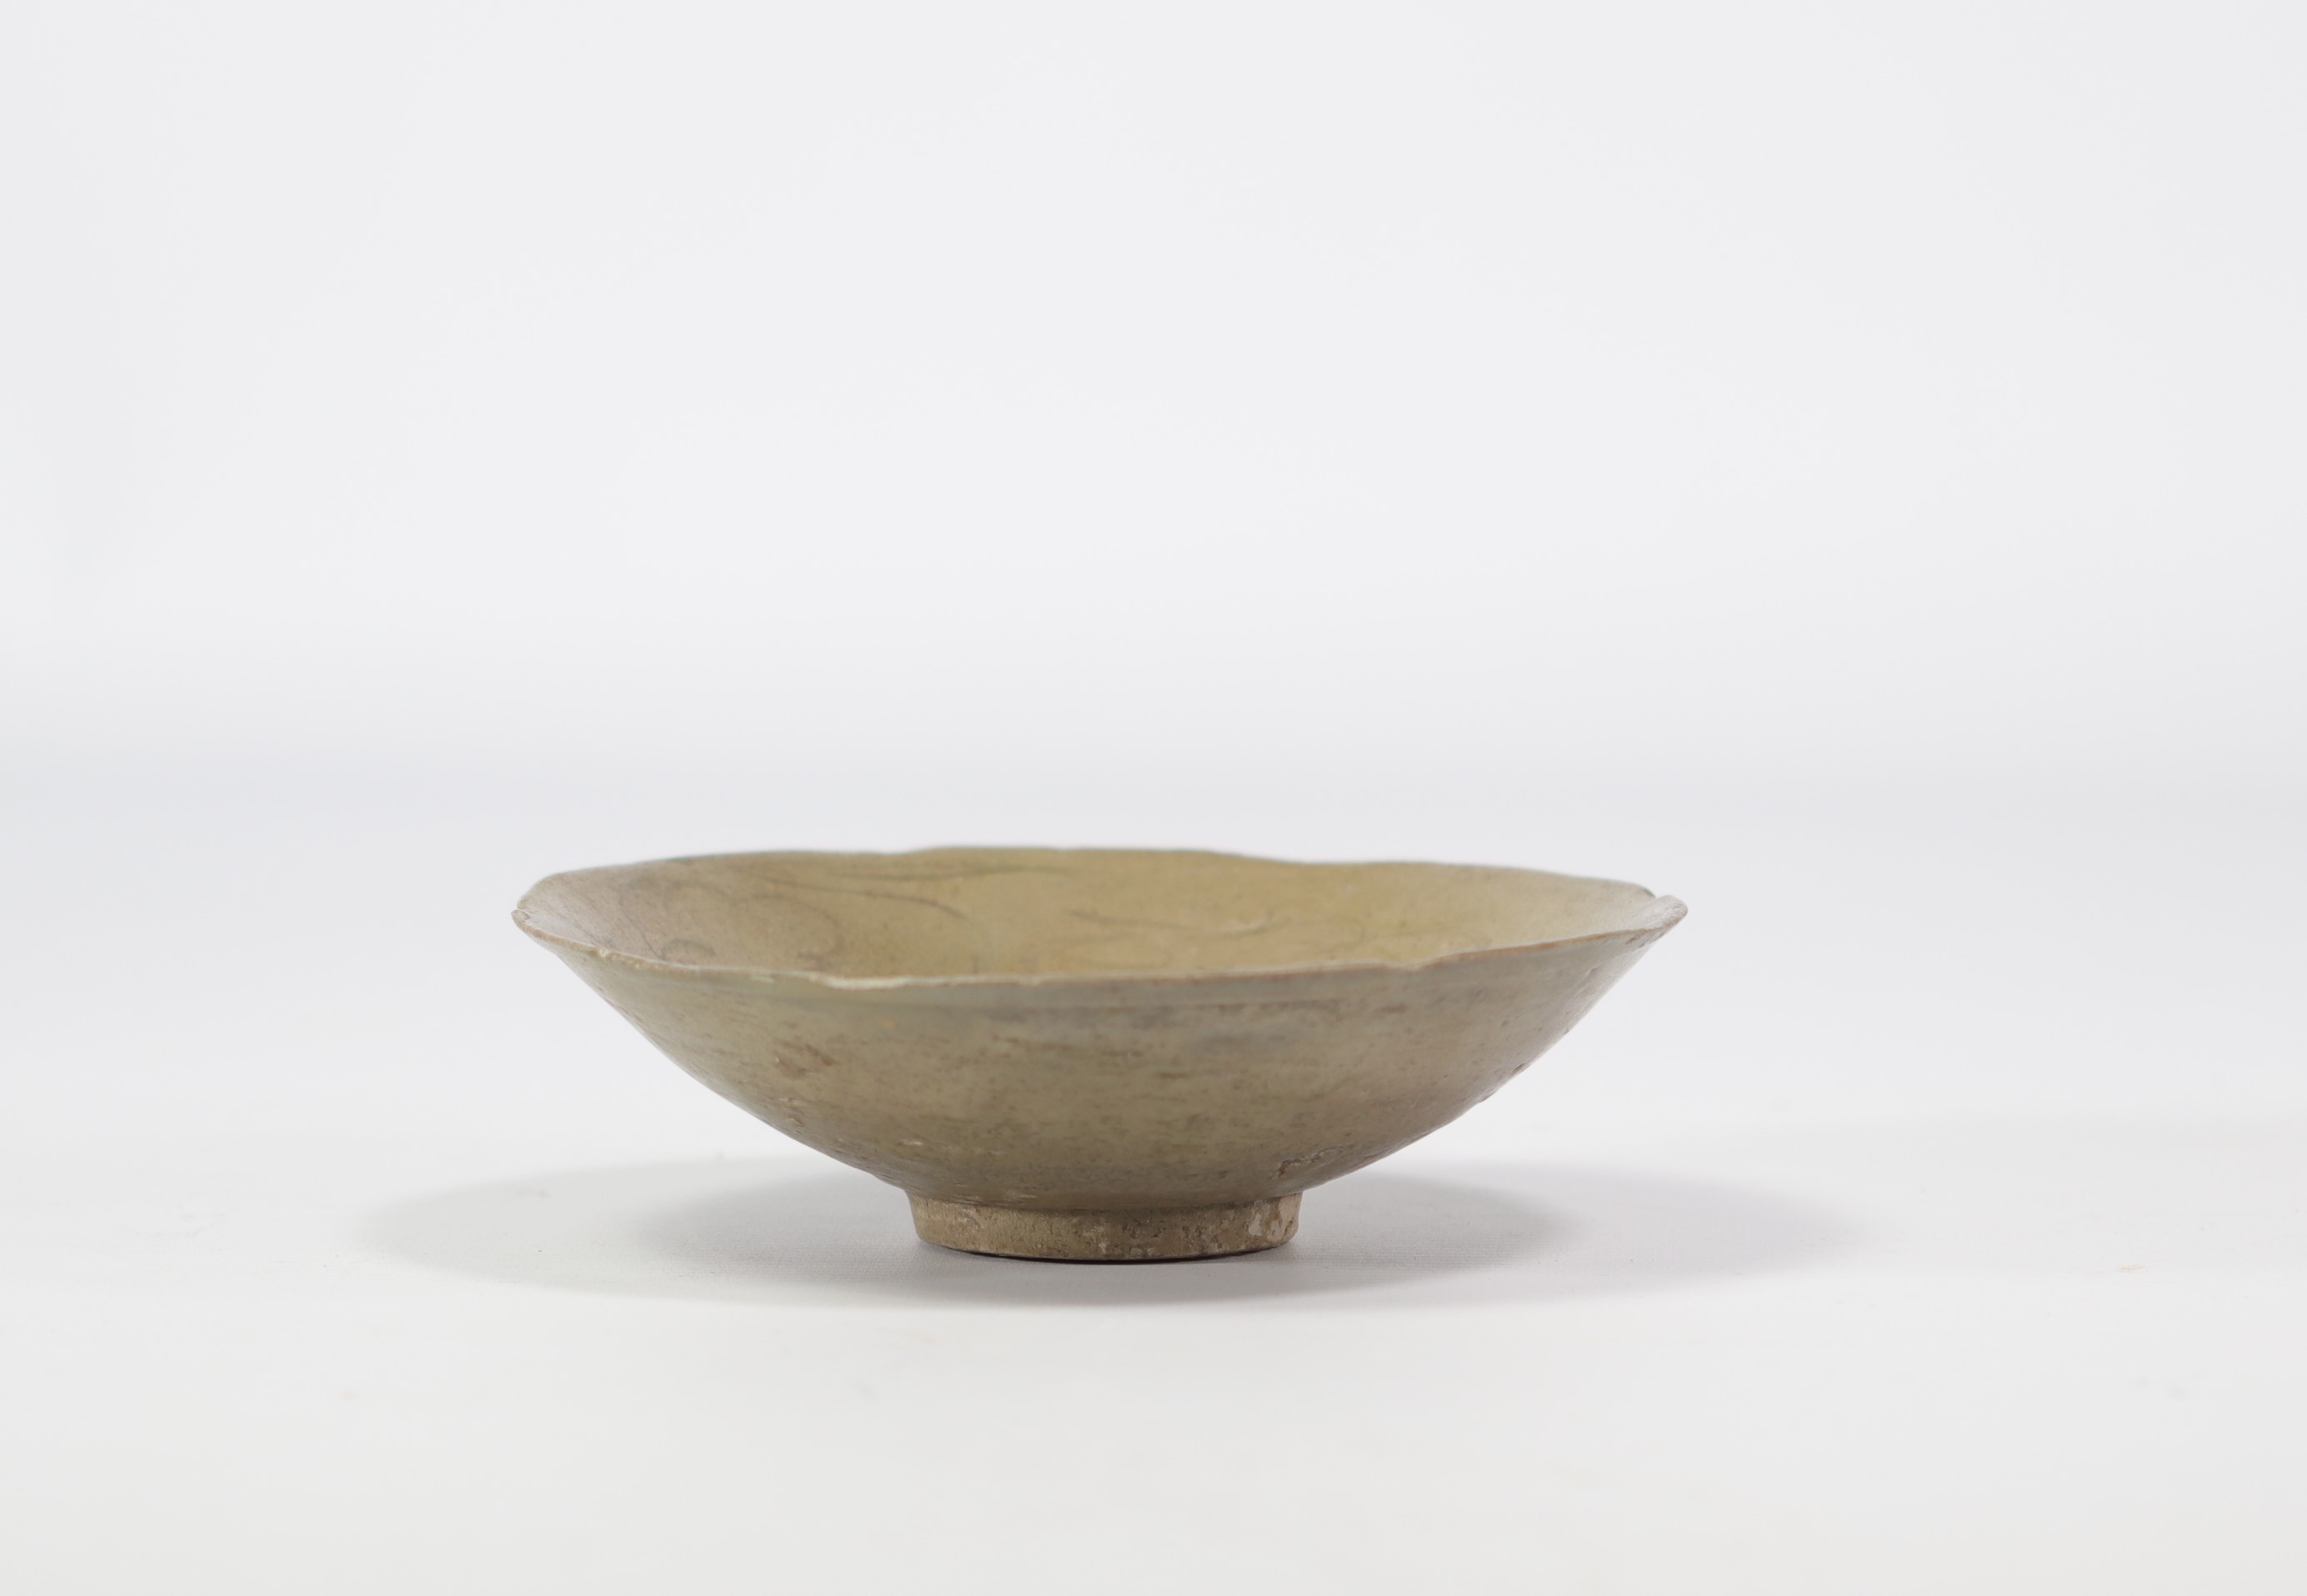 A celadon bowl with incised decoration, China, Song Dynasty - Image 2 of 3